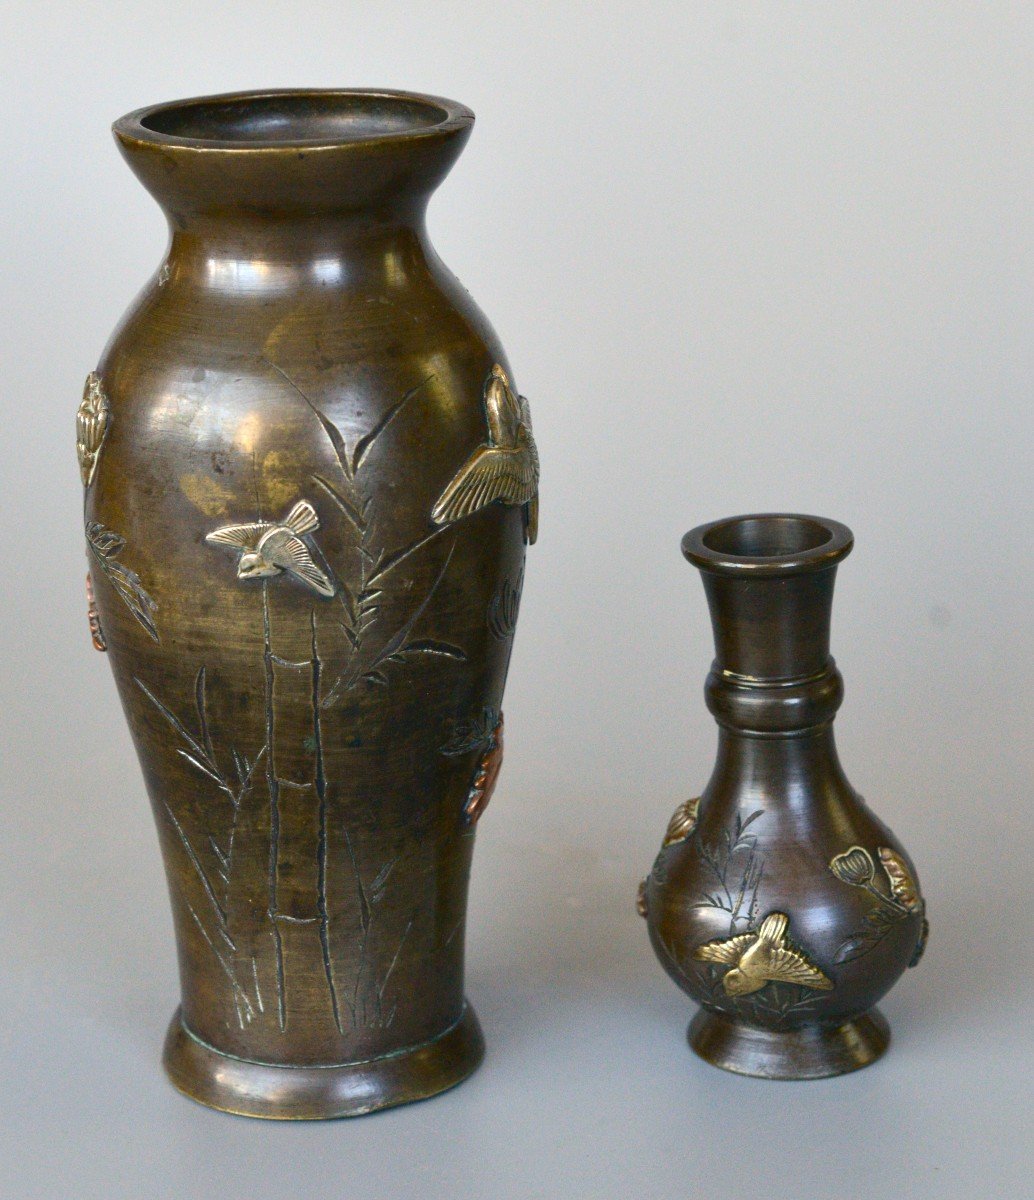 Japan Two Small Bronze Vases Inlaid With Gold, Silver And Copper, 19th C.-photo-1